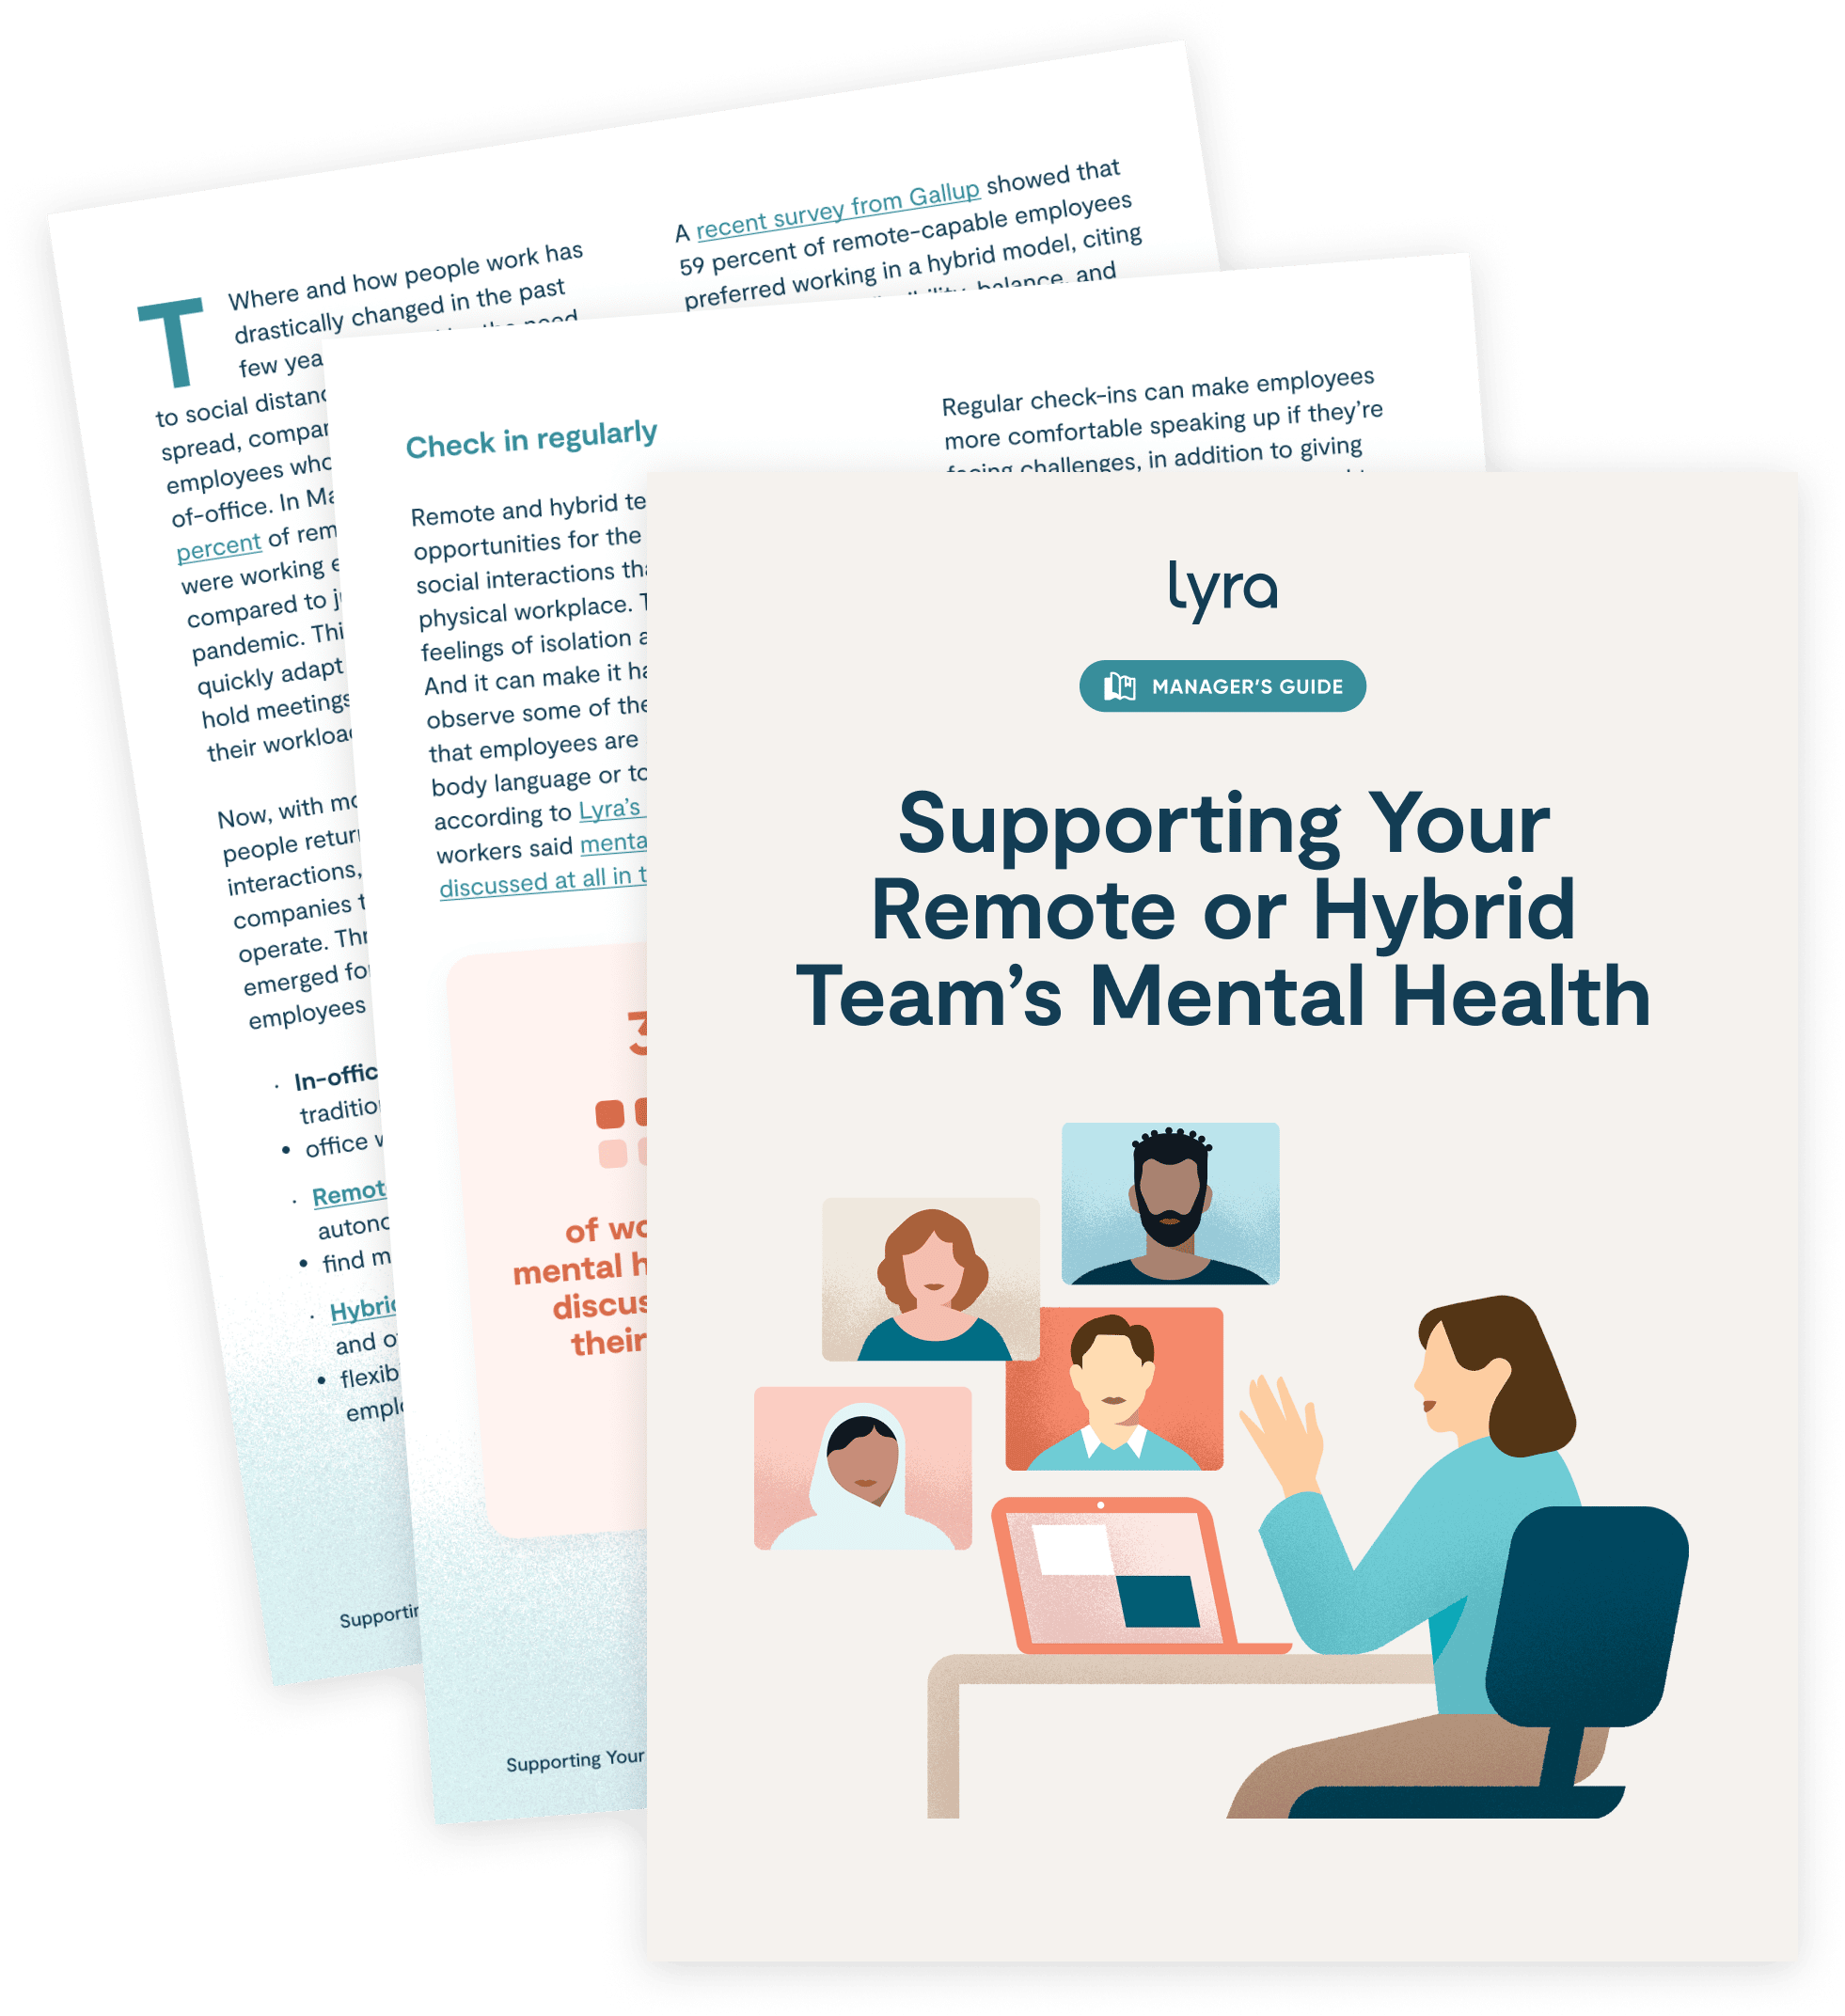 Manager’s Guide: Supporting Your Remote or Hybrid Team’s Mental Health